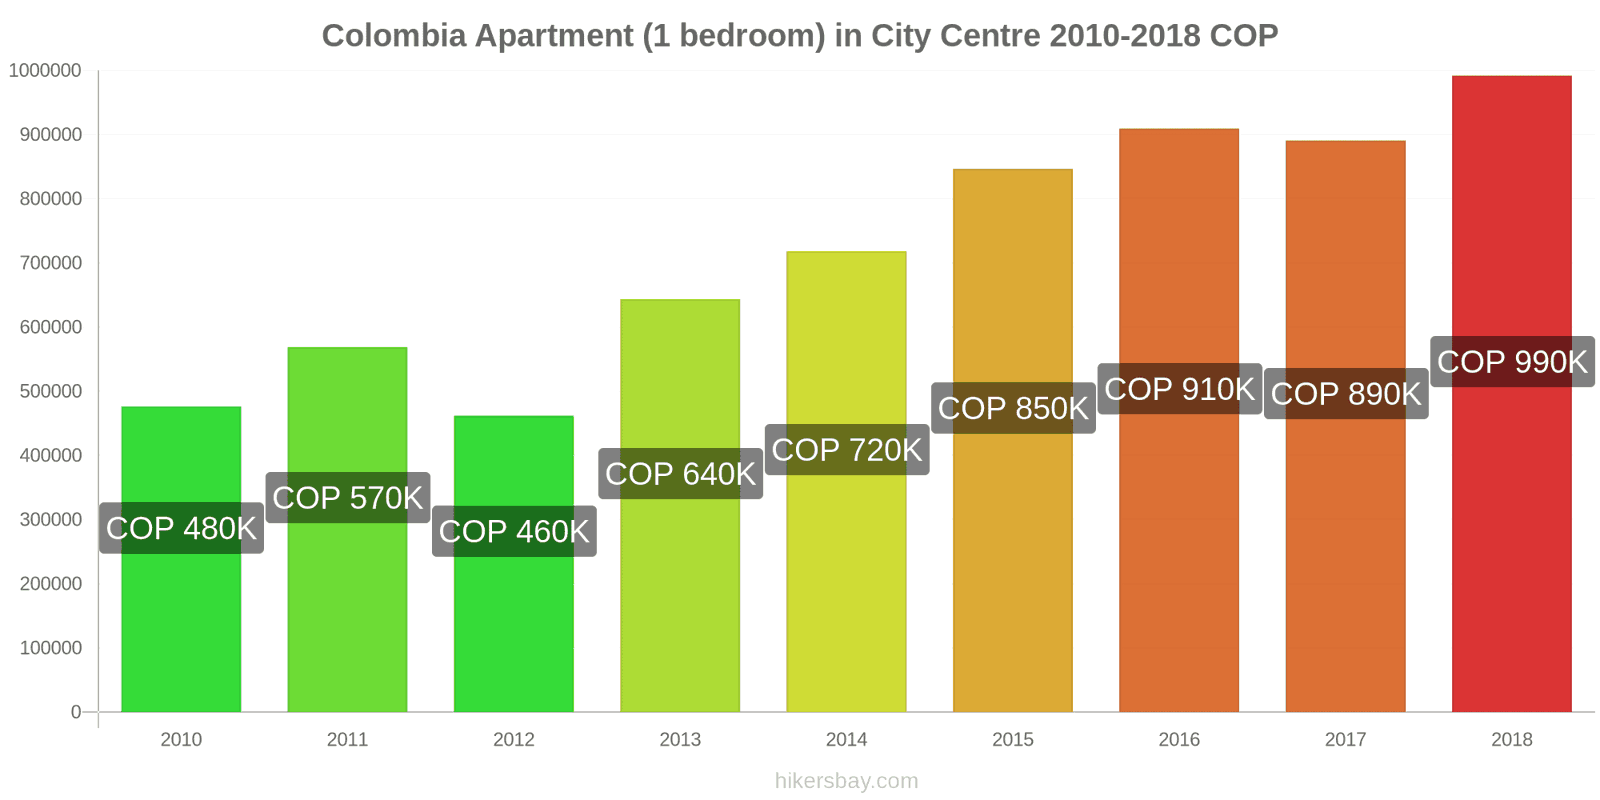 Colombia price changes Apartment (1 bedroom) in city centre hikersbay.com